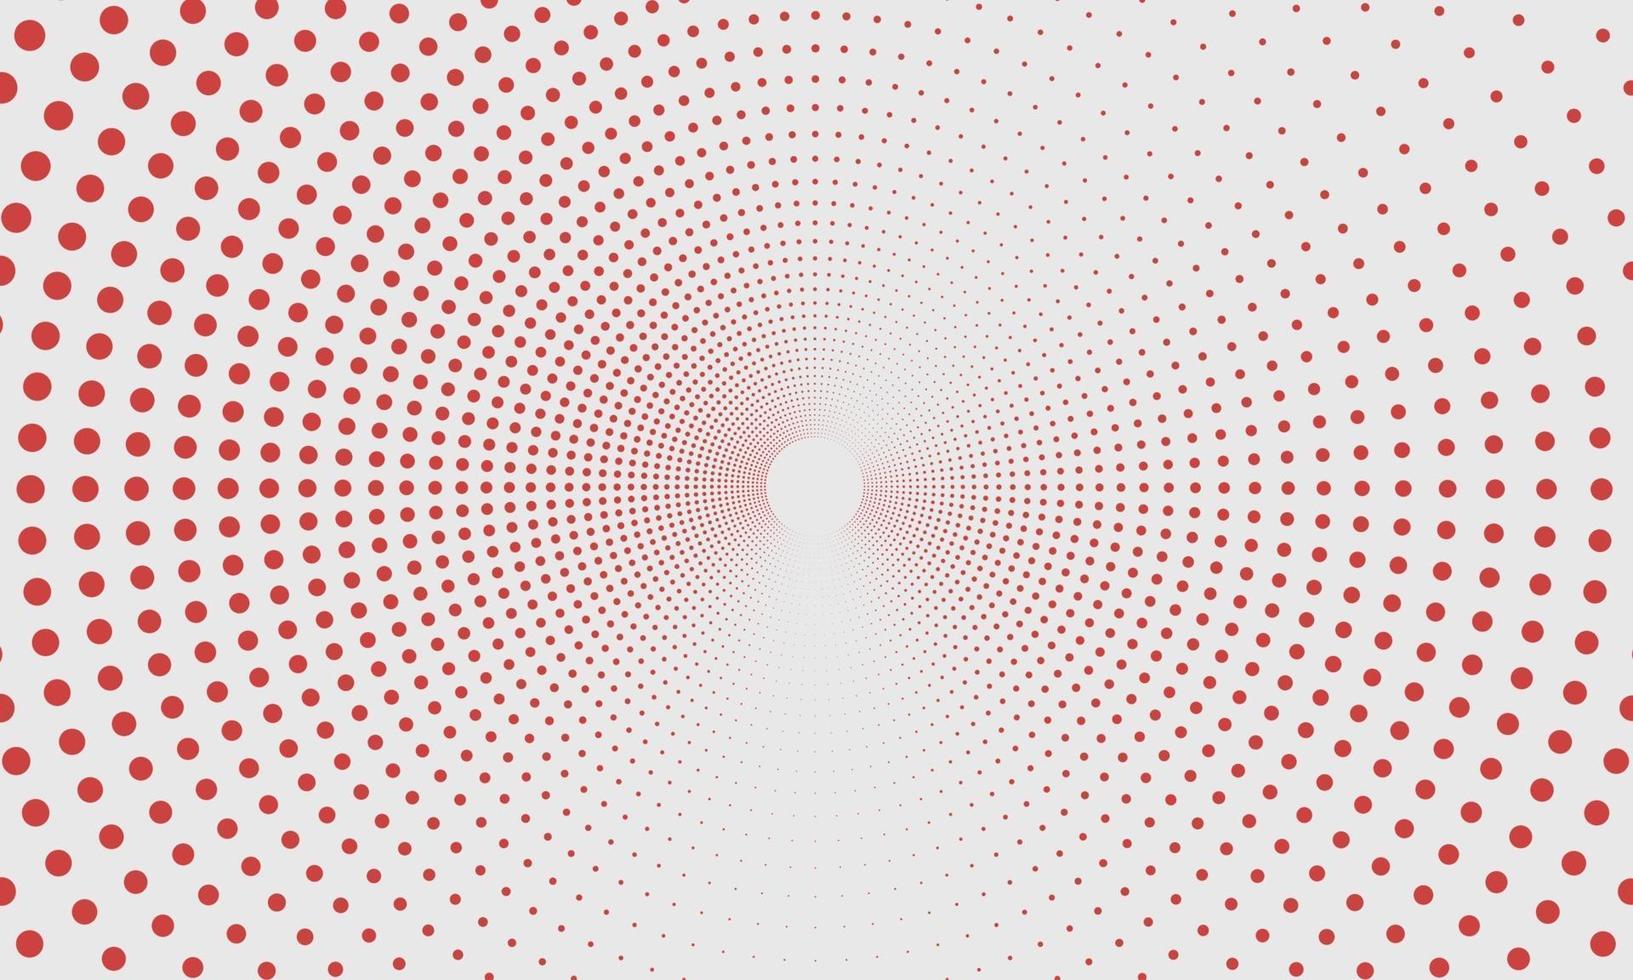 Circular Red Halftone Dots Pattern Background vector